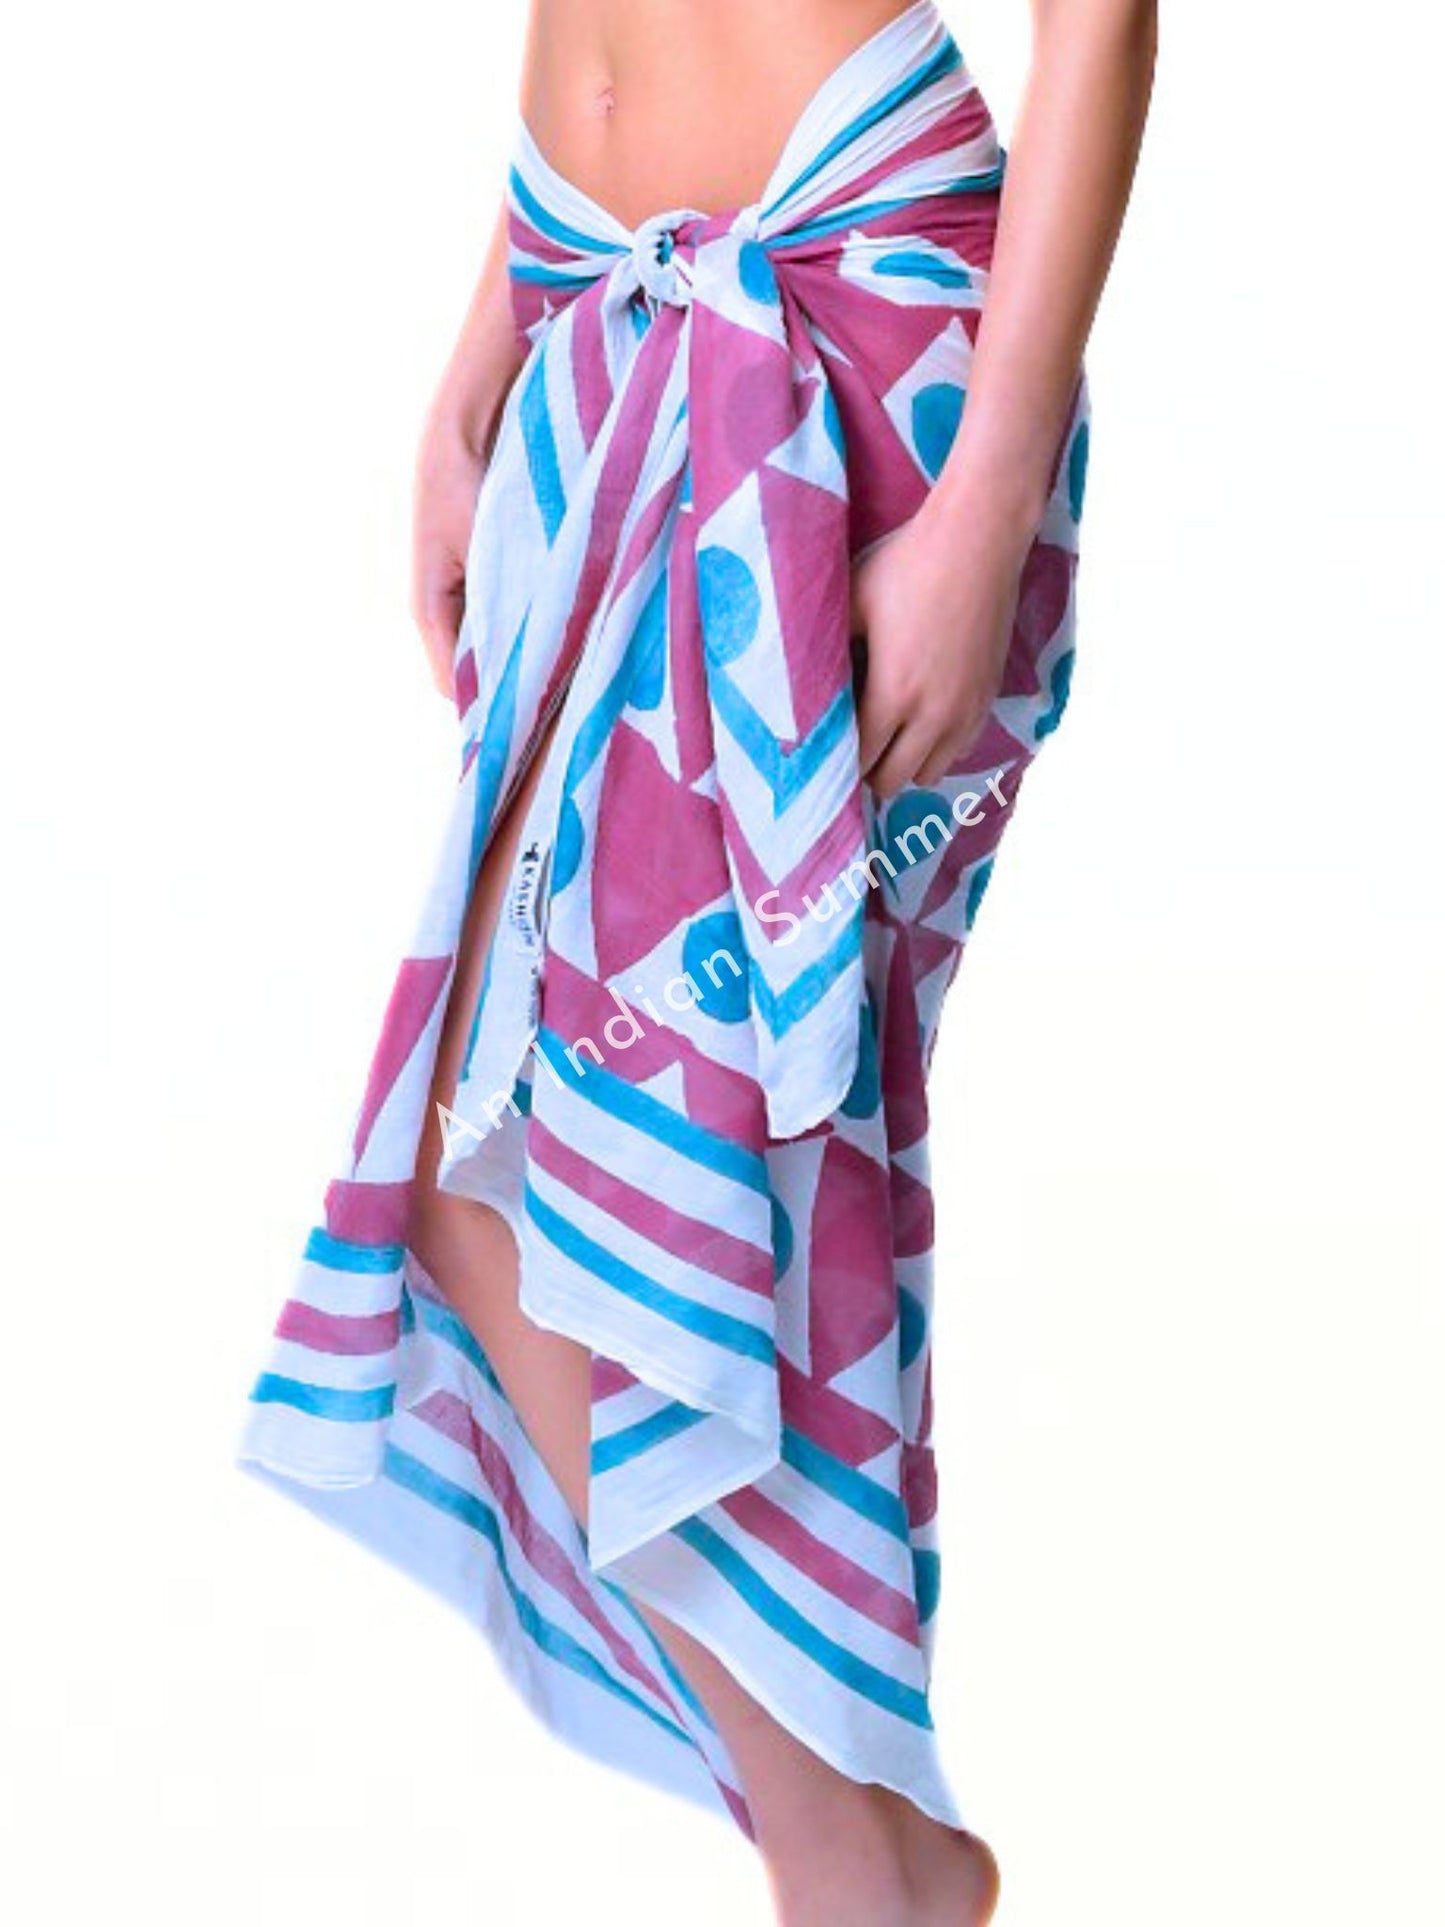 Virtue is Bold Sarong Pareo | Magenta & Teal | Hand Block Printed | Soft Cotton Voile | An Indian Summer | Seasonless Timeless Sustainable Ethical Authentic Artisan Conscious Clothing Lifestyle Brand